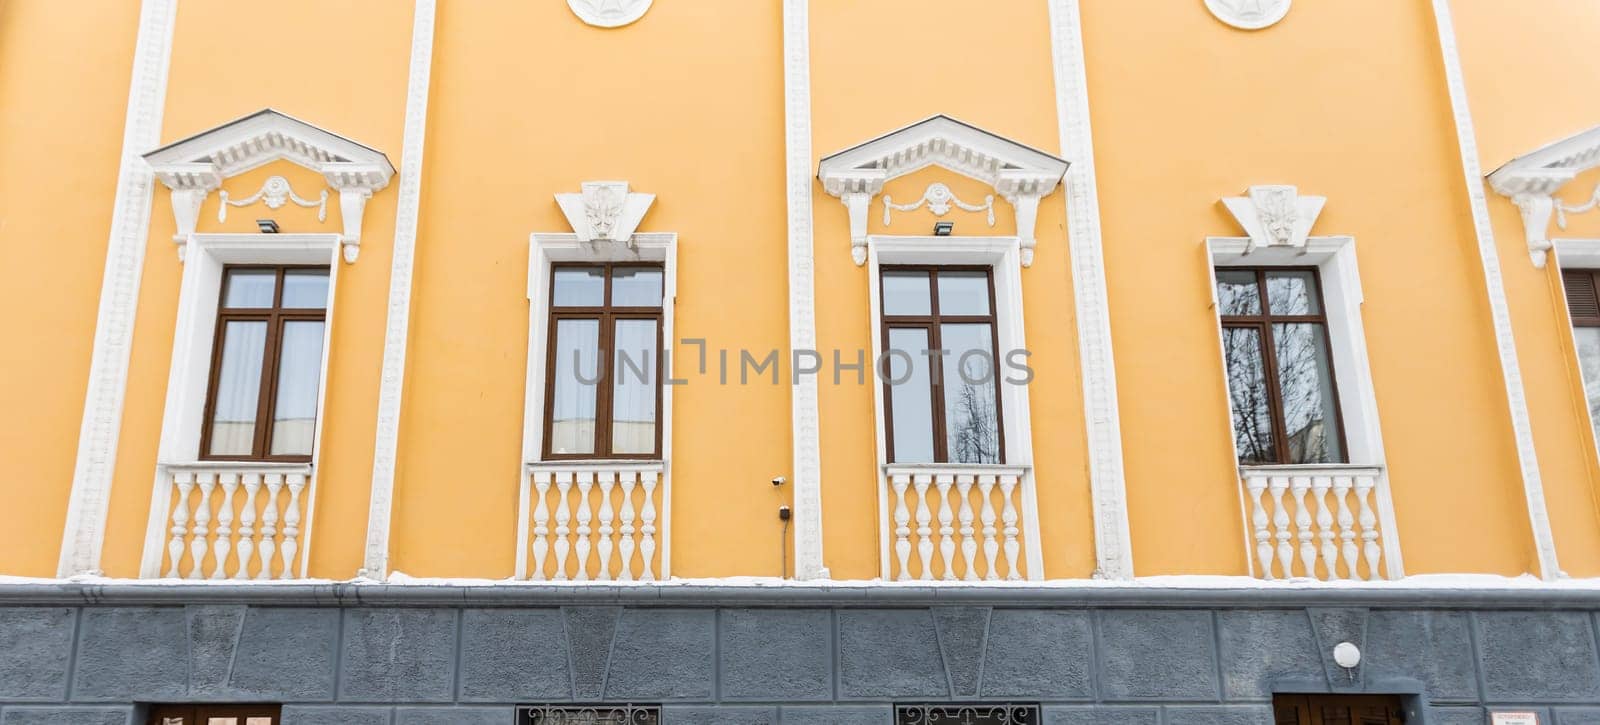 Elegant classical windows decorated with stucco ornaments on beige antique facades. Vintage classic architecture. Banner by Satura86